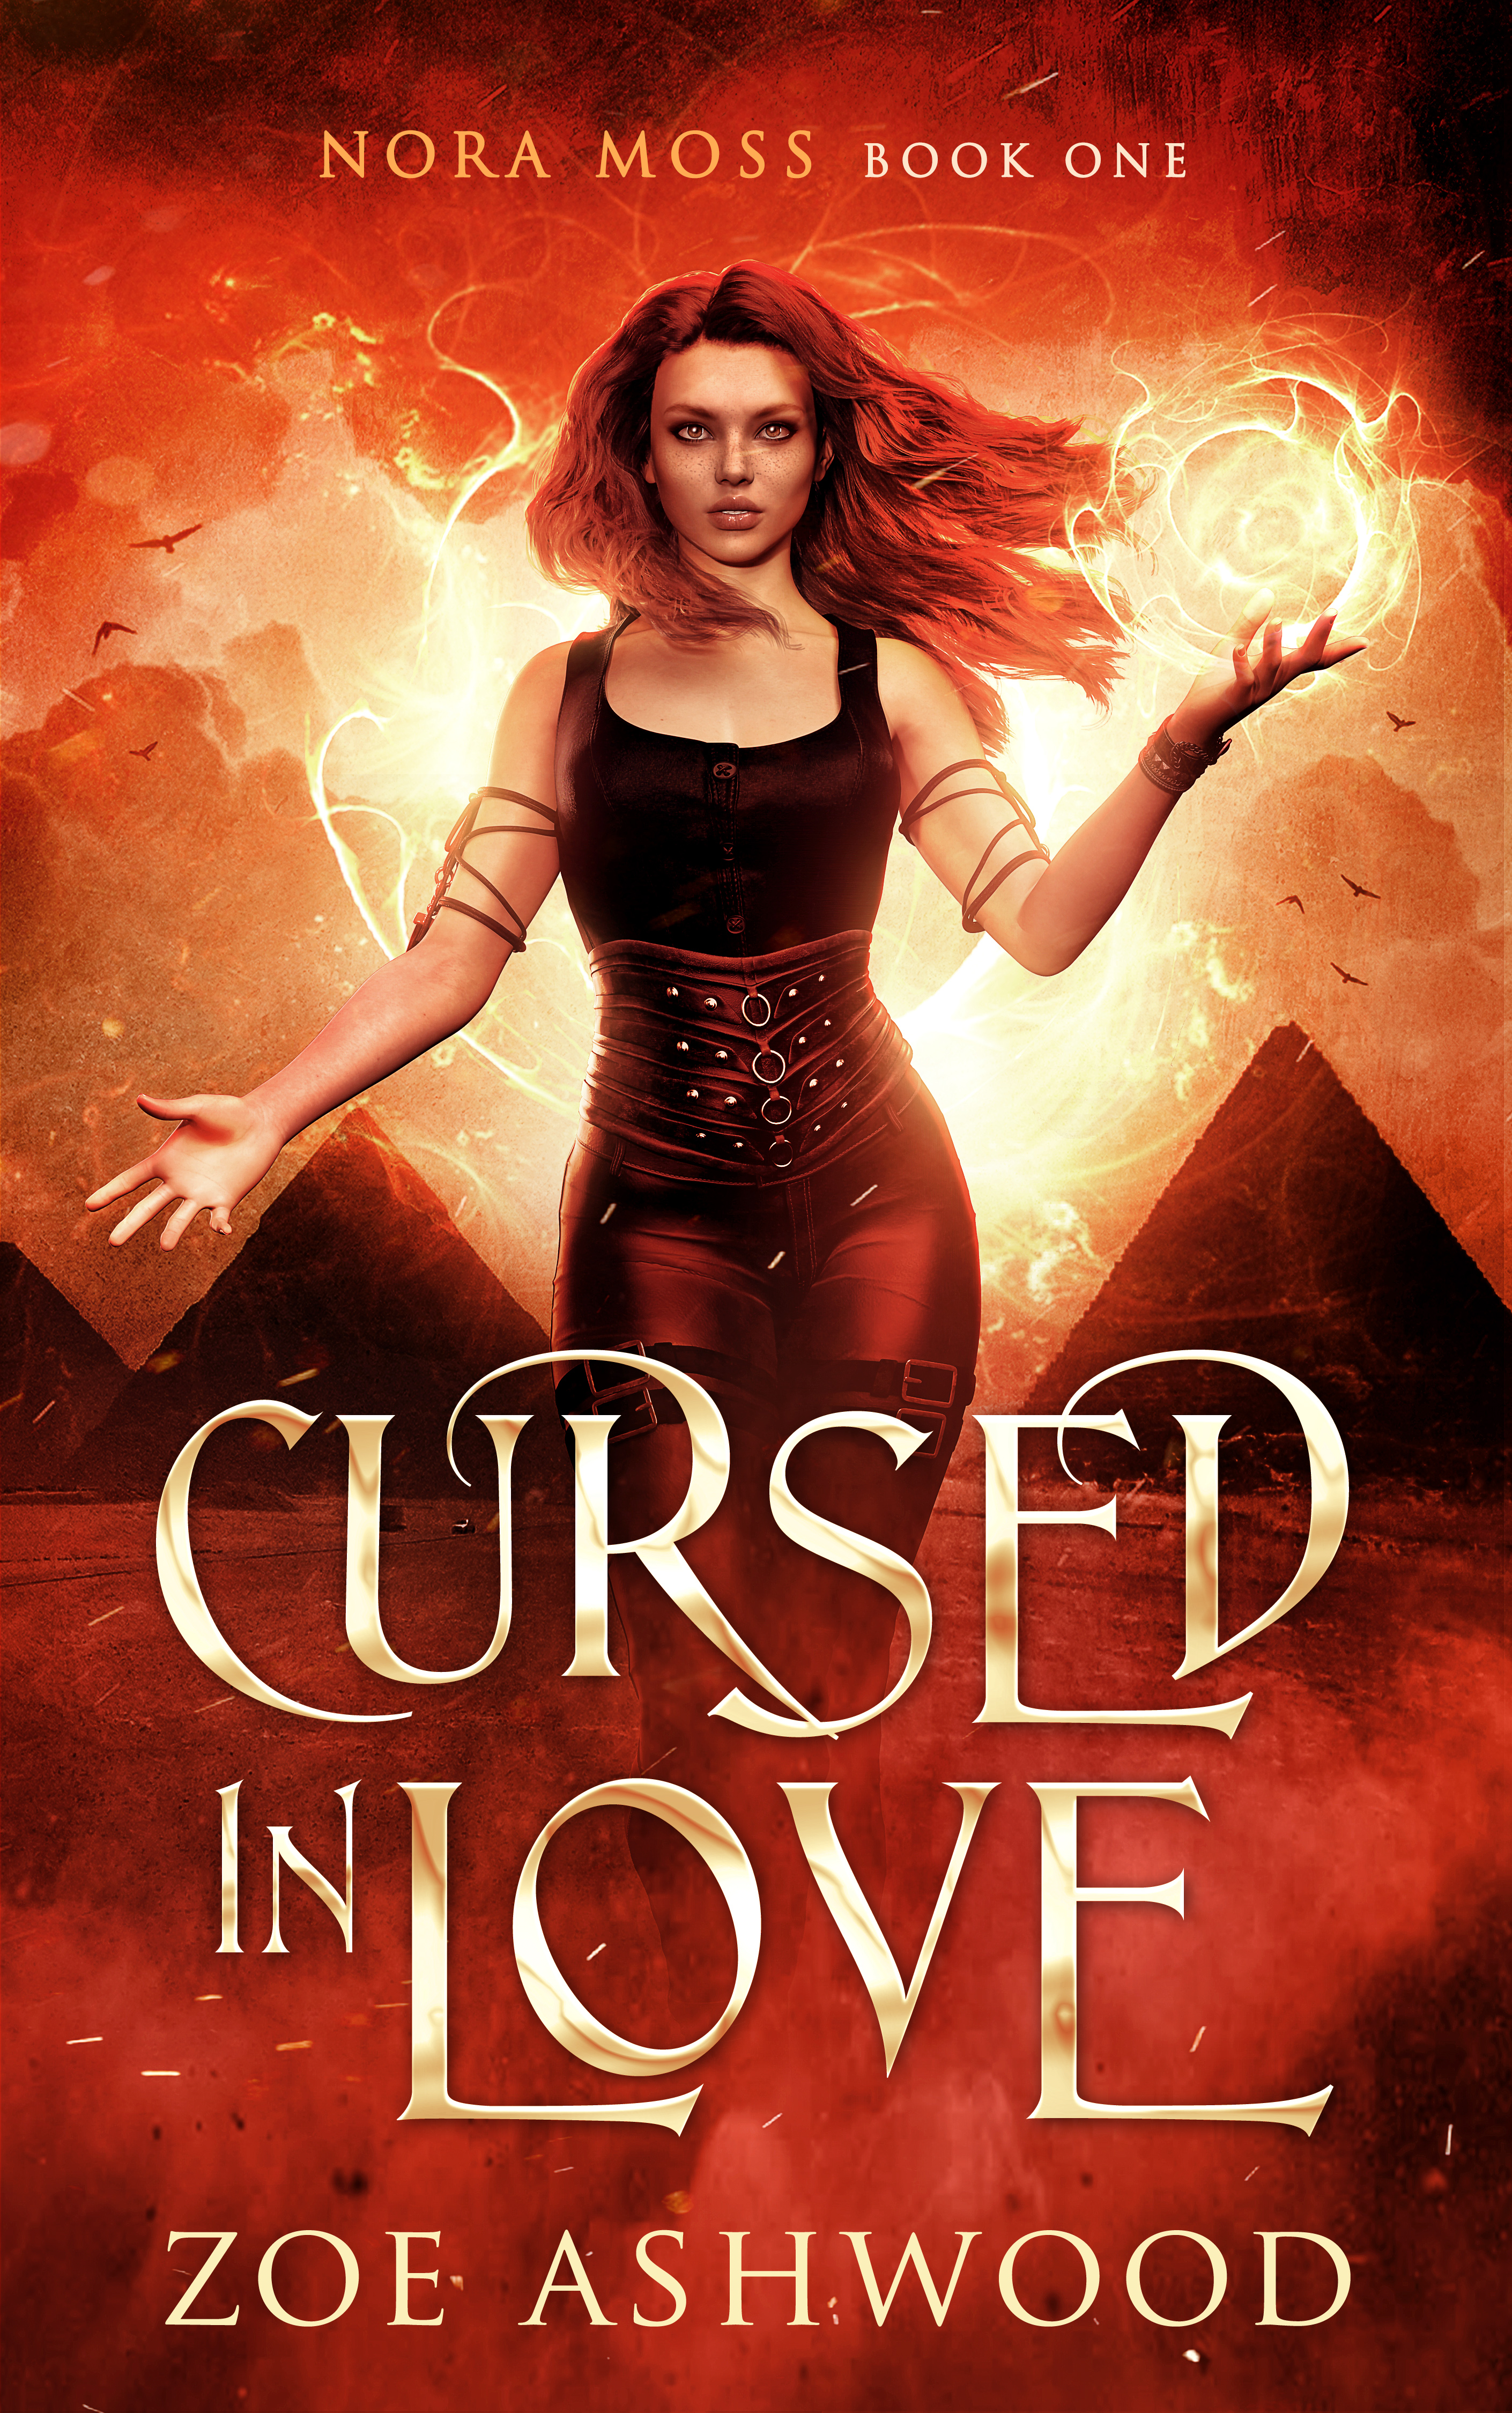 Cursed in Love - Nora Moss - steamy reverse harem paranormal romance by Zoe Ashwood